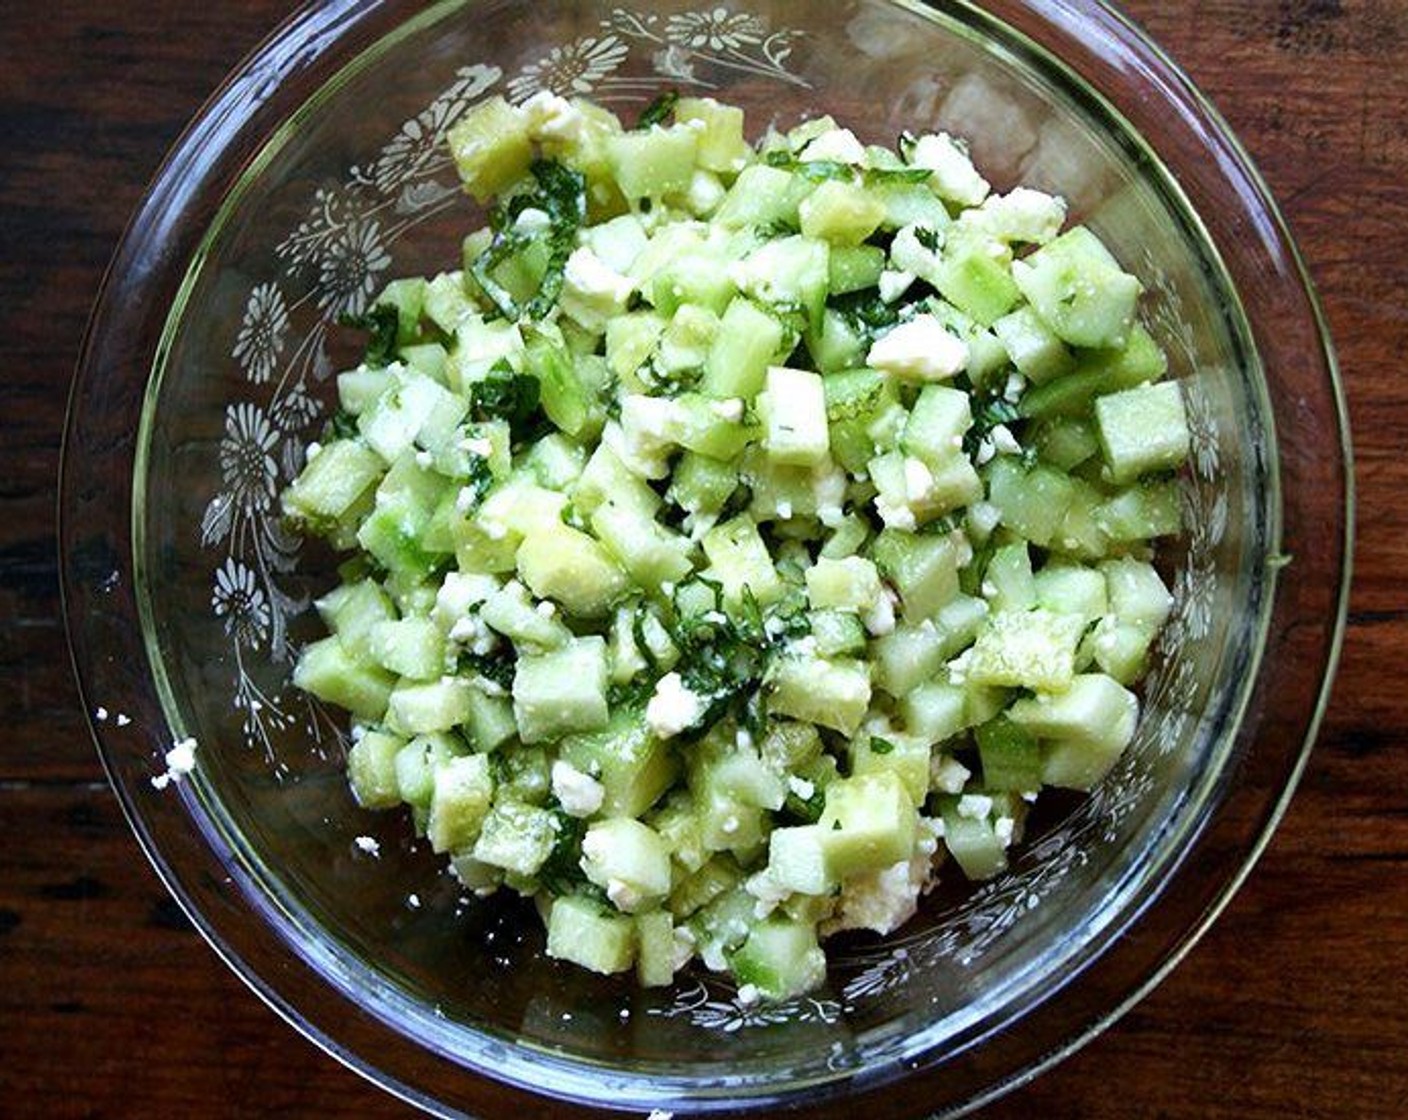 step 7 Add Cucumbers (2 cups), Feta Cheese (to taste), and Fresh Mint (2 Tbsp) in a bowl. Toss with equal parts Extra-Virgin Olive Oil (1 splash) and White Balsamic Vinegar (1 splash). Season with salt if necessary — the feta is salty, so go light to start.